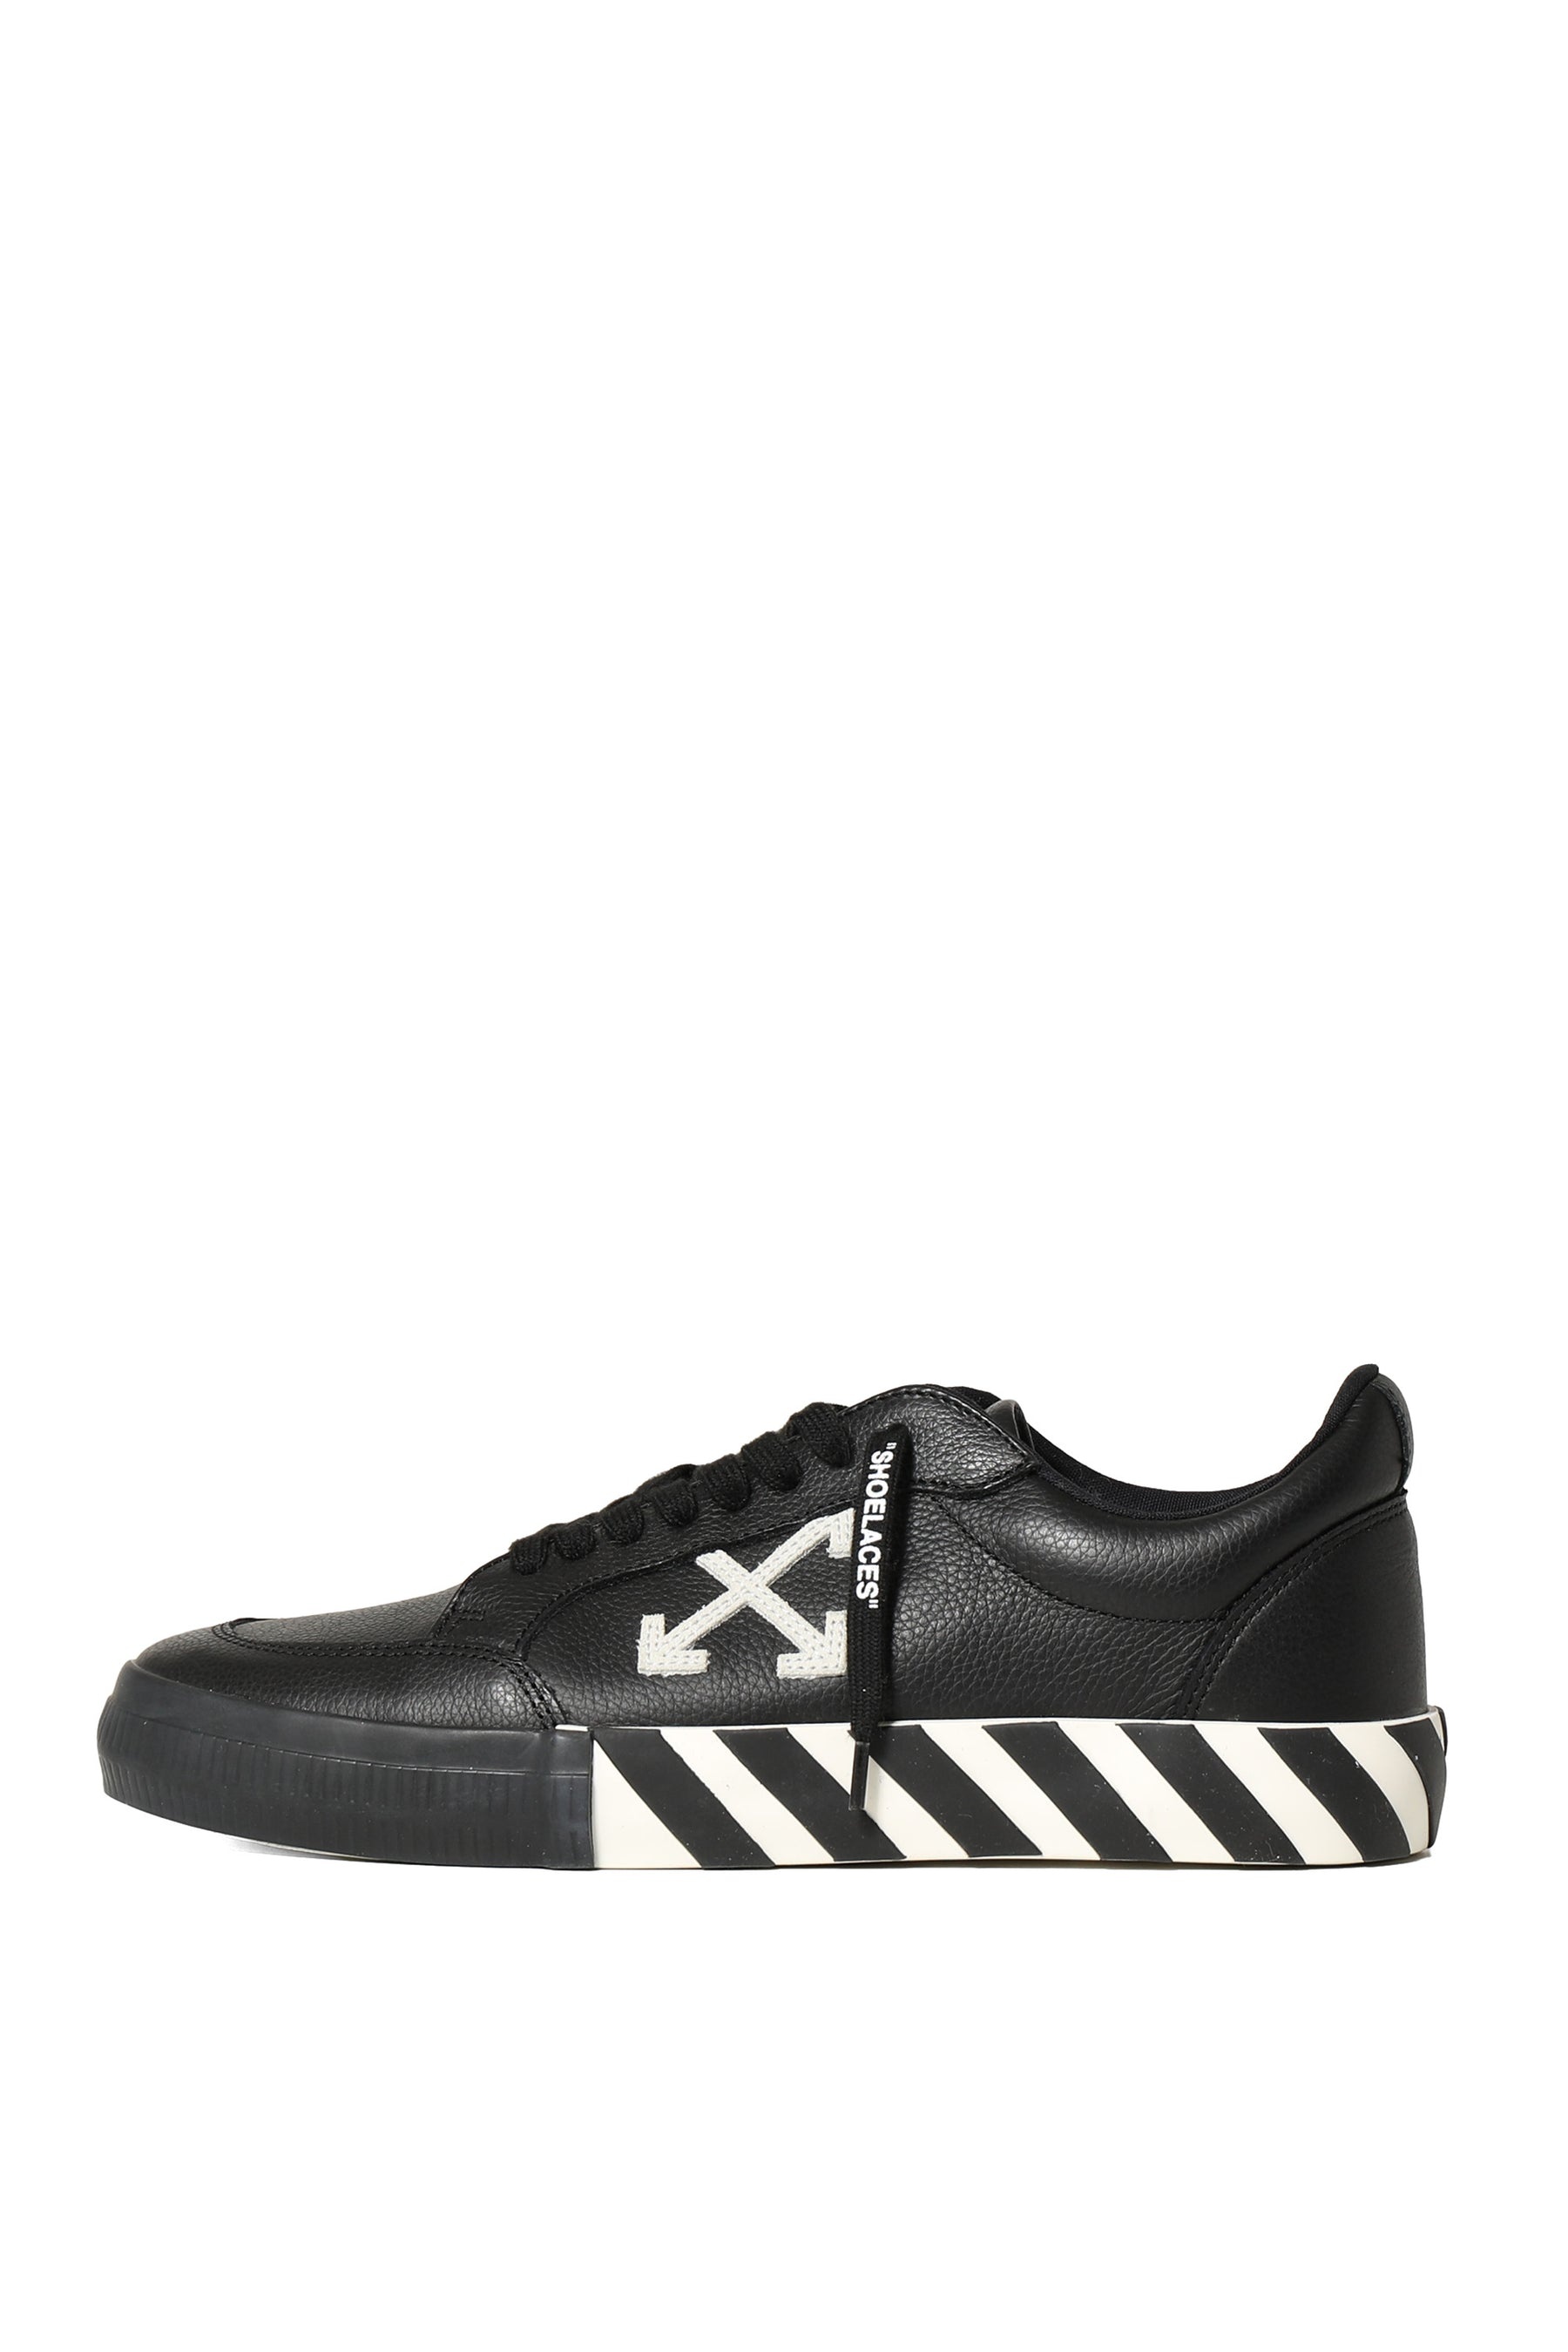 LOW VULCANIZED CALF LEATHER / BLK WHT - 1